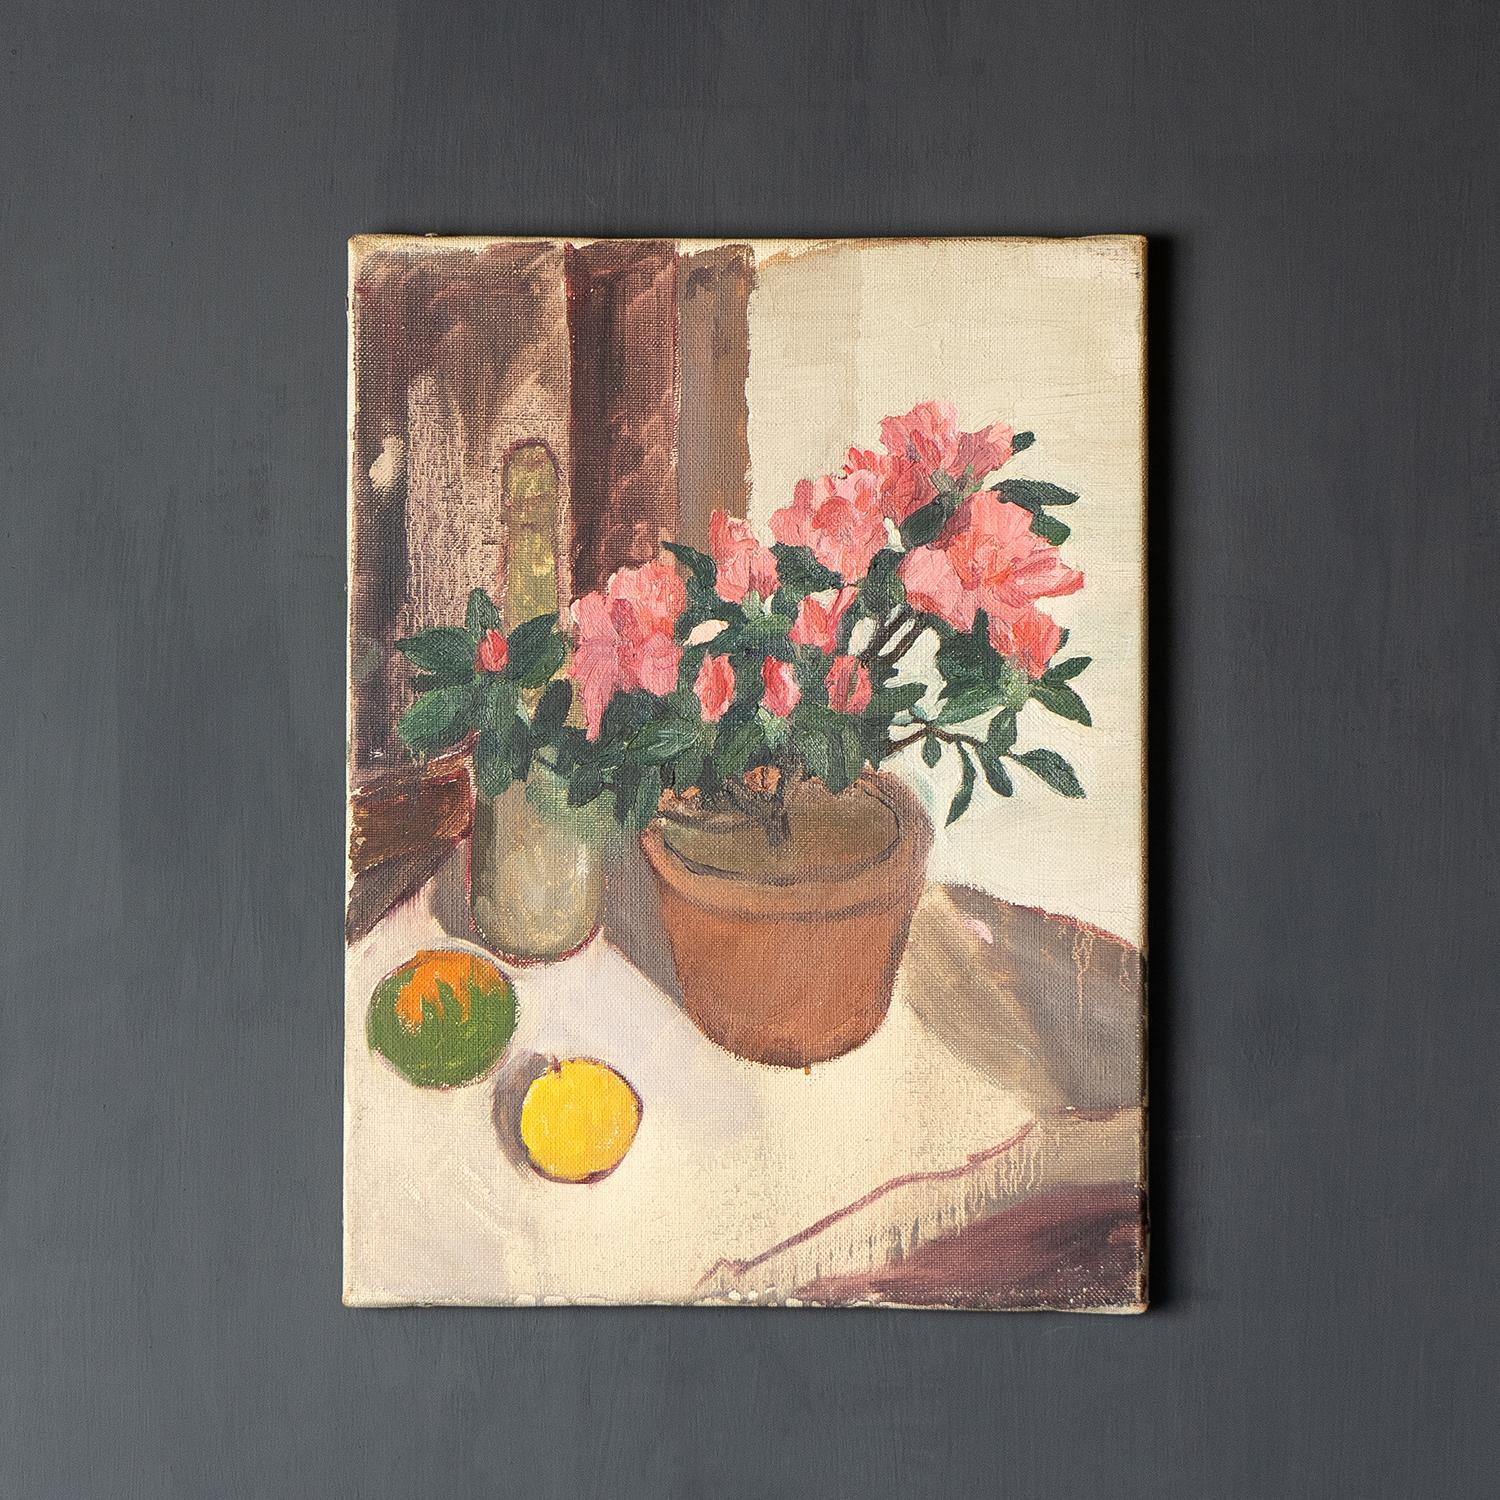 ORIGINAL VINTAGE OIL PAINTING
Depicting a pot of pink flowers on a kitchen table with a fringed tablecloth alongside a glass bottle, a lemon and a wonderfully captured orange.

Unsigned but painted in a confident expressionist style.

Dating from